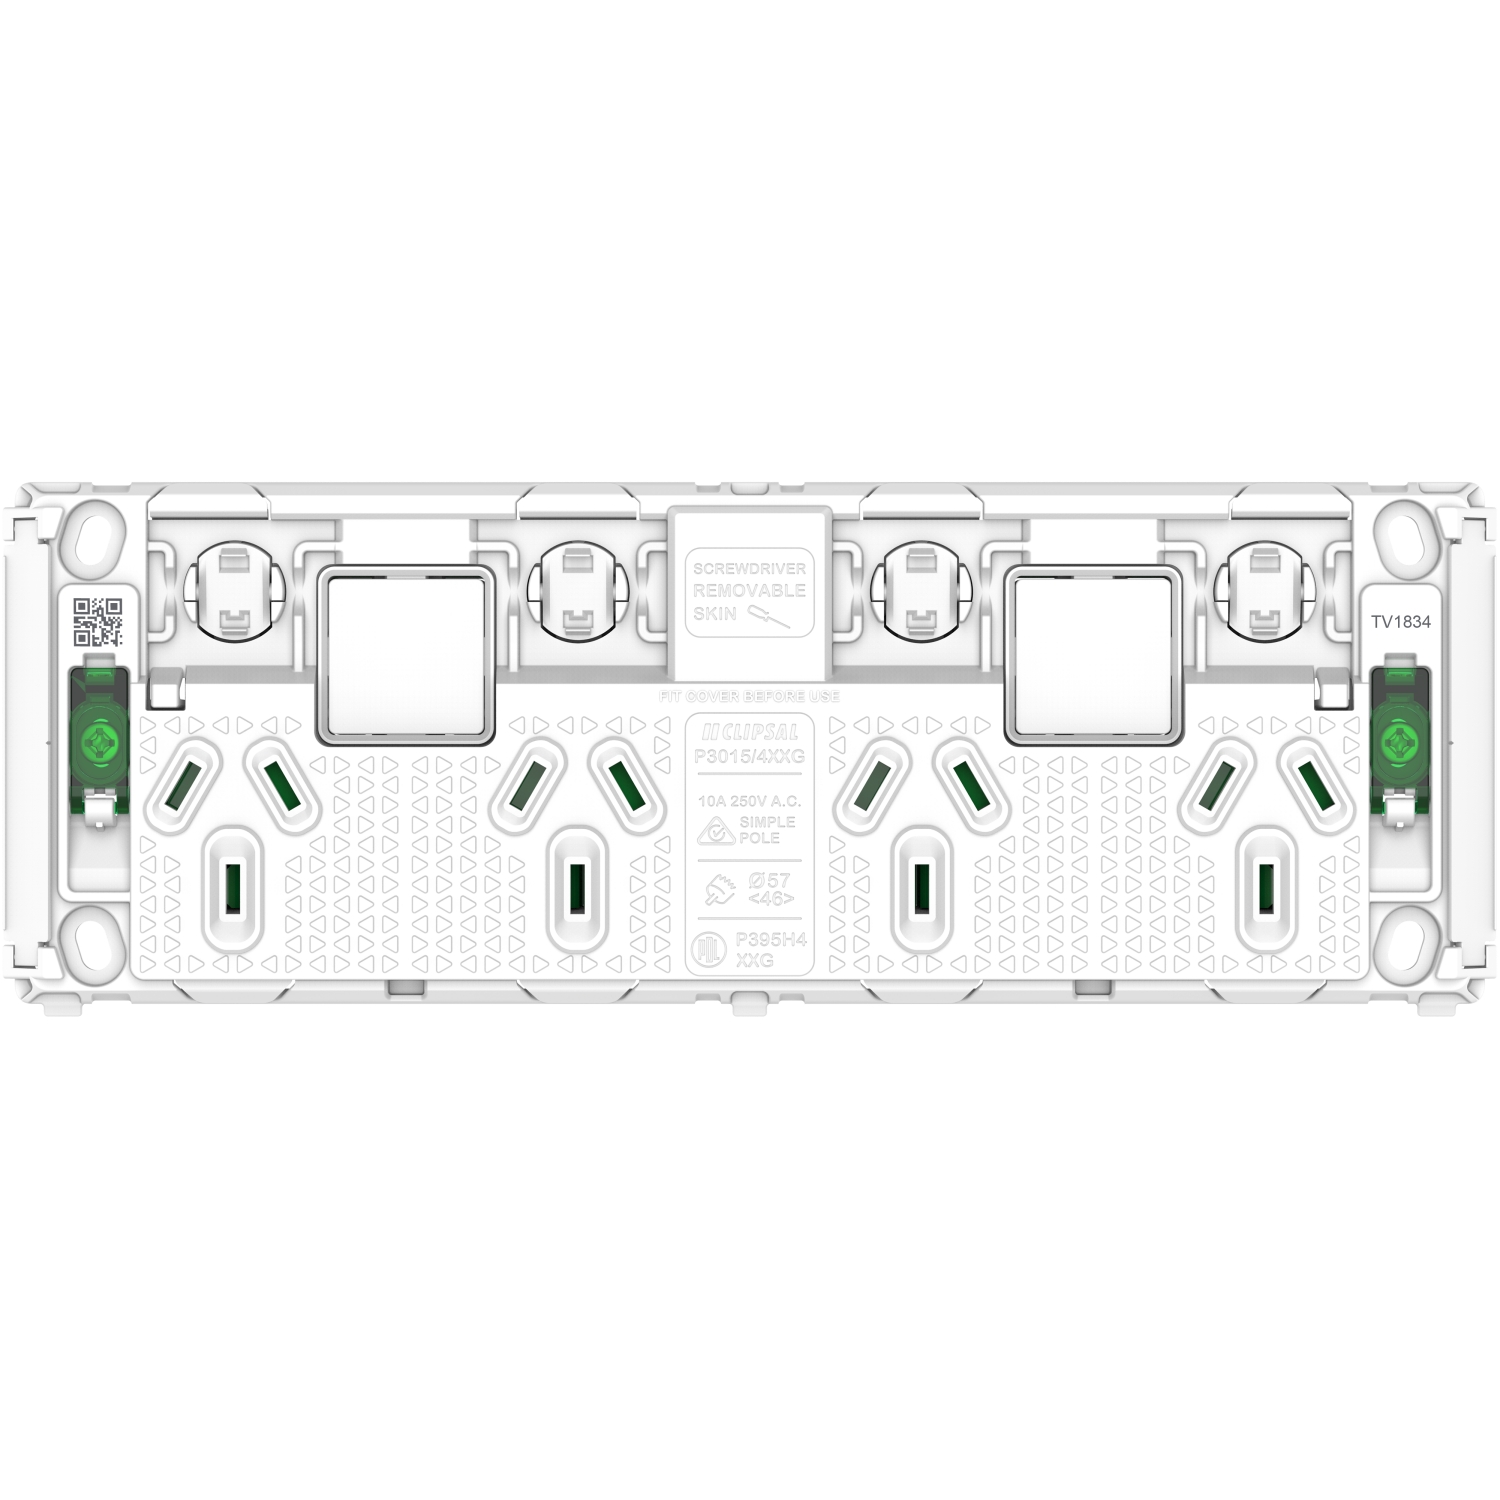 PDL Pro Series - Grid Quad Switched Socket 10A + 2 Switches Horizontal